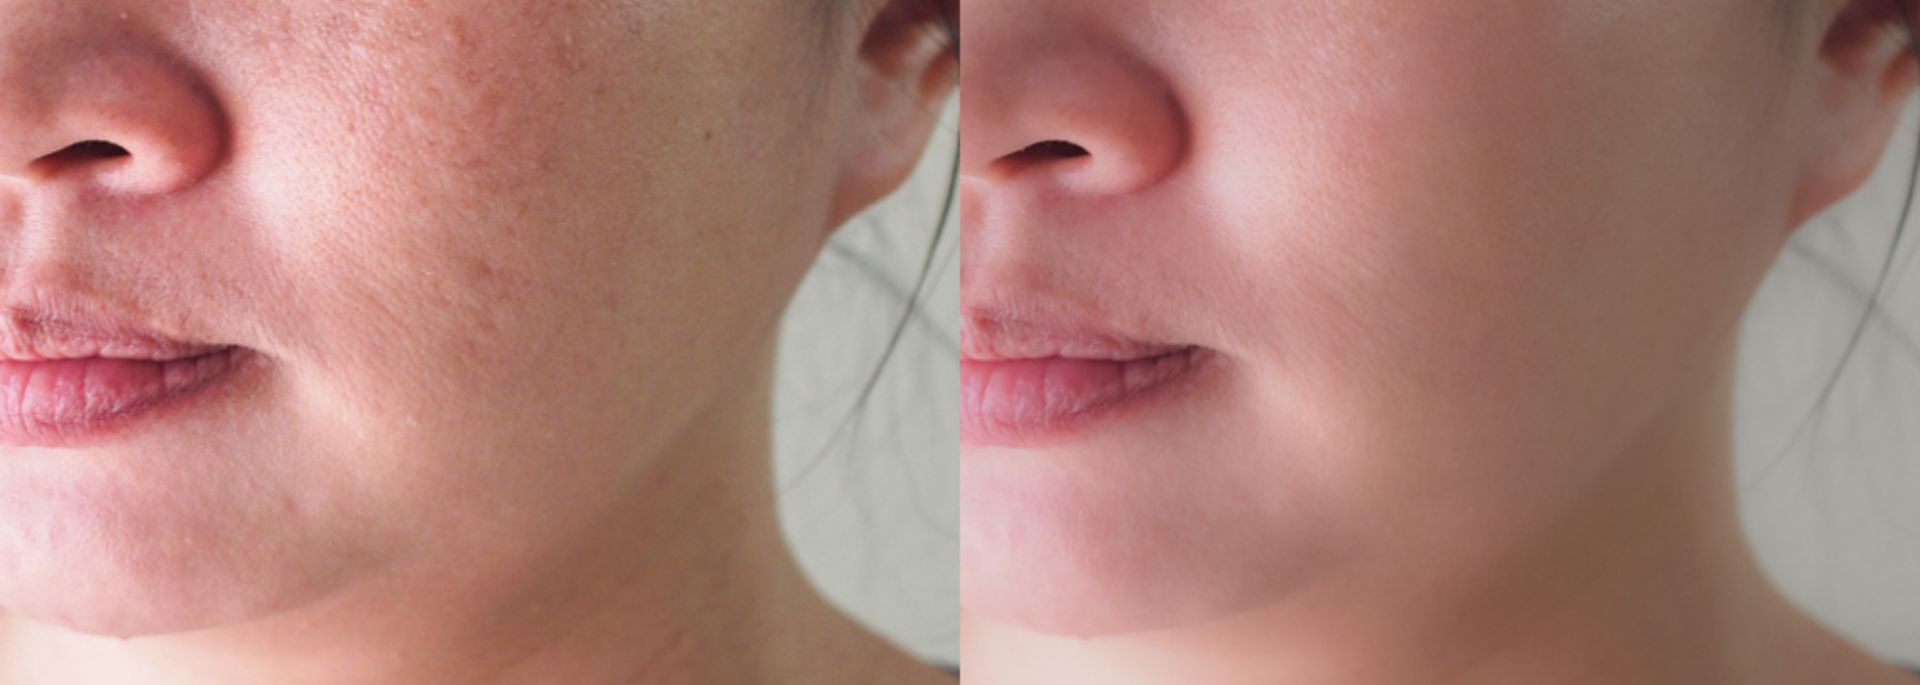 Seeing results from acne scar treatment - Side by side comparison